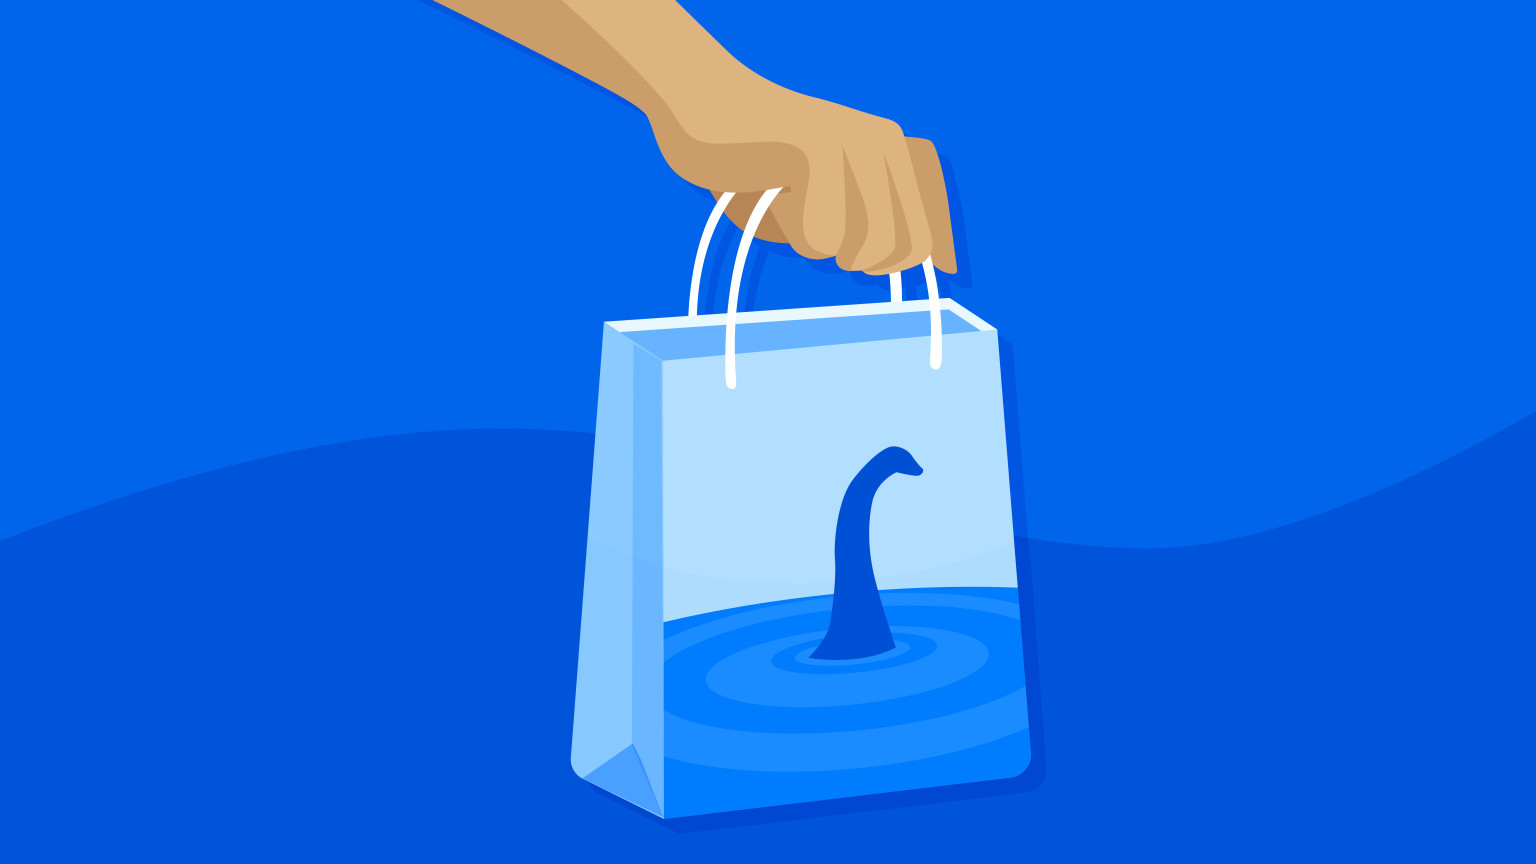 Illustration of a person holding a shopping bag with the lochness monster drawn on it, symbolozing ecommerce myths